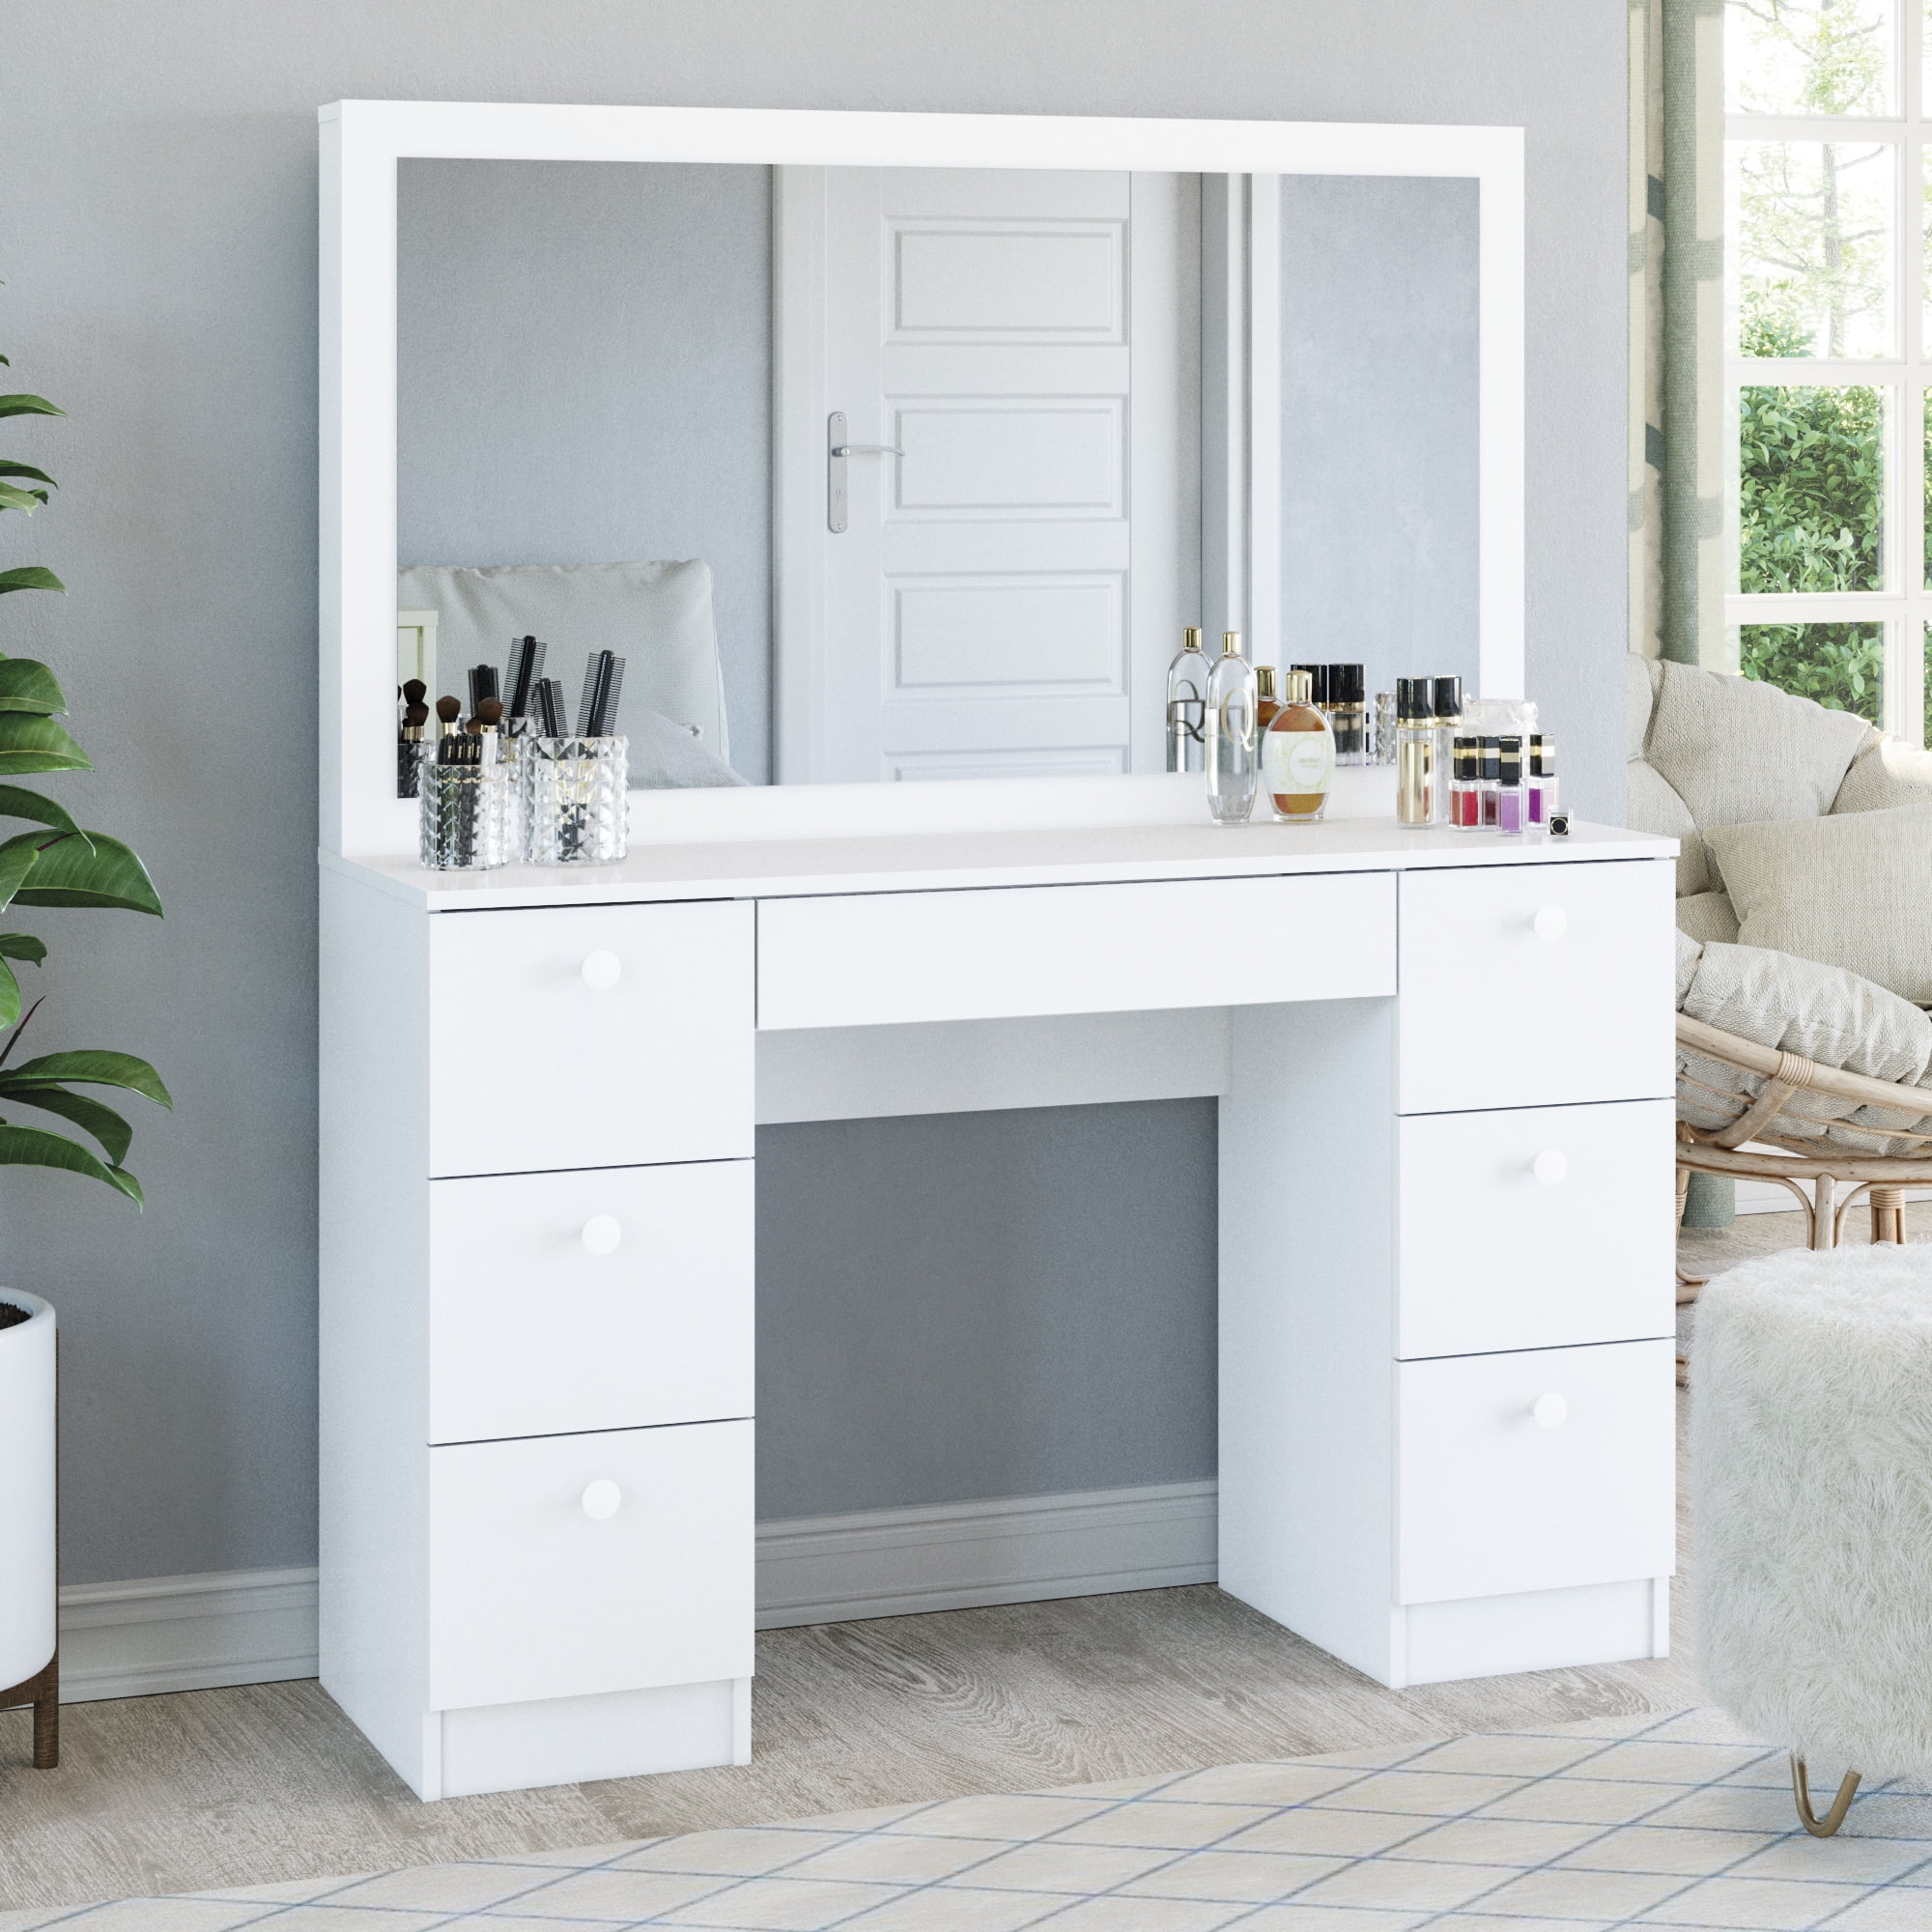 Boahaus Artemisia Modern Vanity Table, Free Standing Dressing Table Mirror With Storage